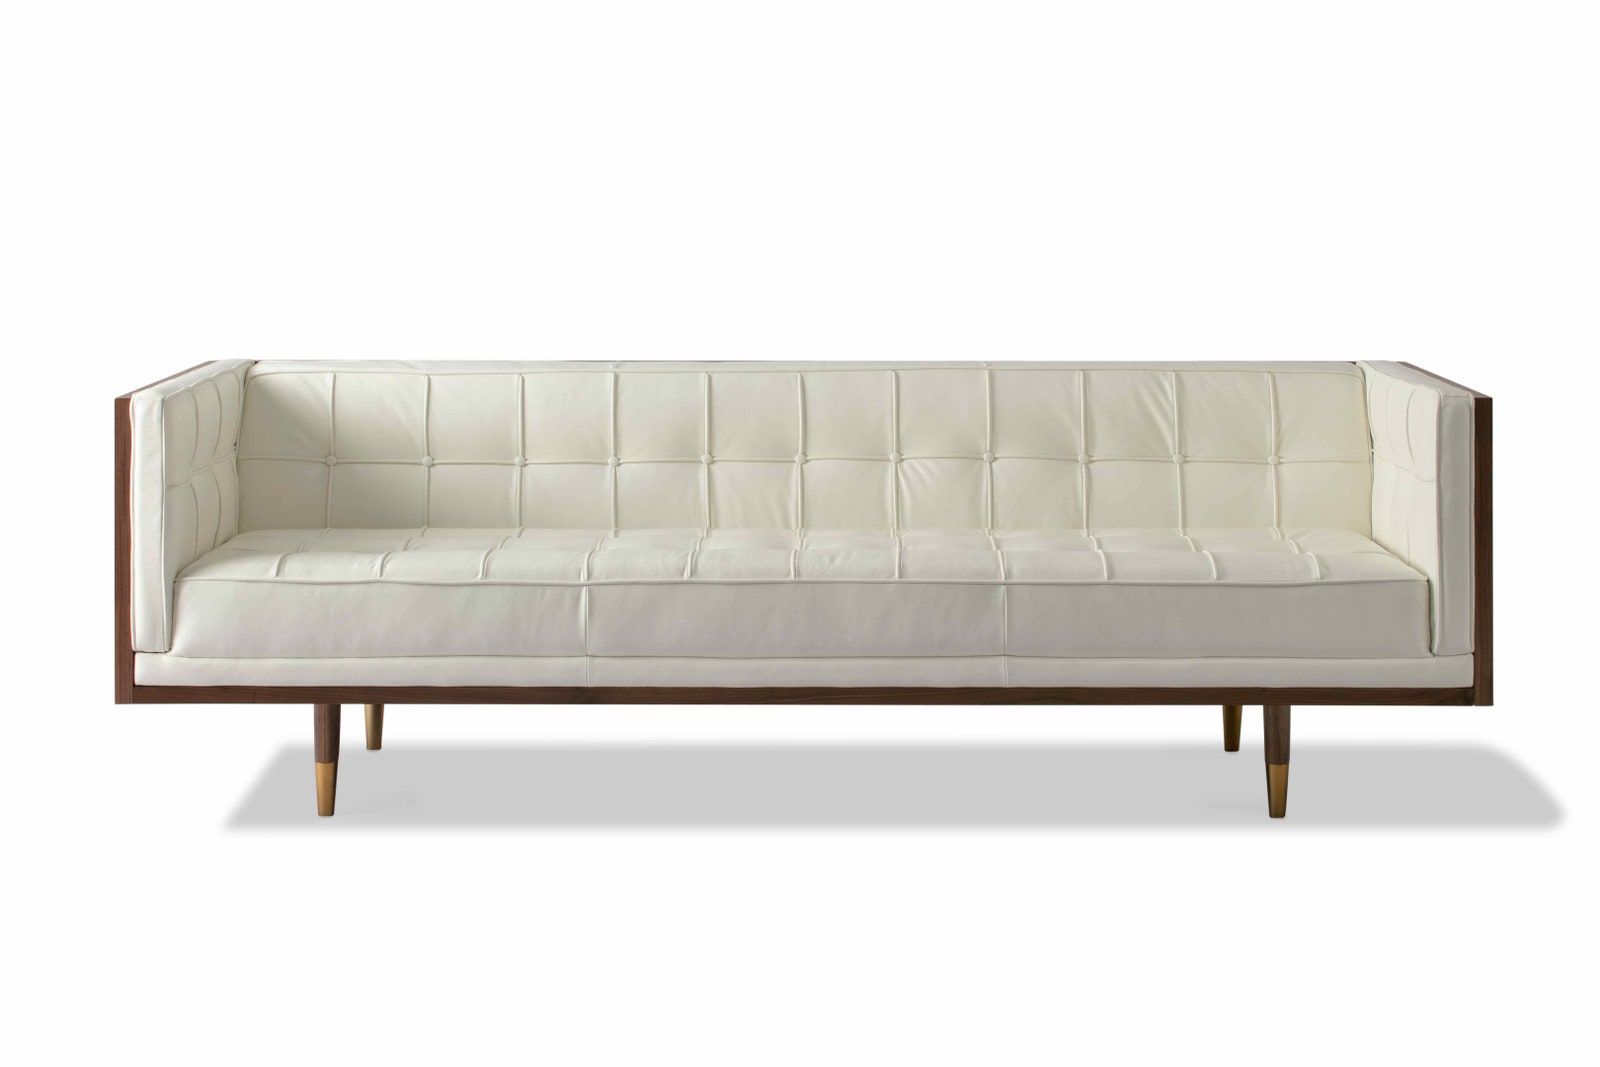 5 Mid Century Modern Sofas To Breathe Life Into Your Living Space |  Architectural Digest Pertaining To Mid Century Modern Sofas (Photo 6 of 15)